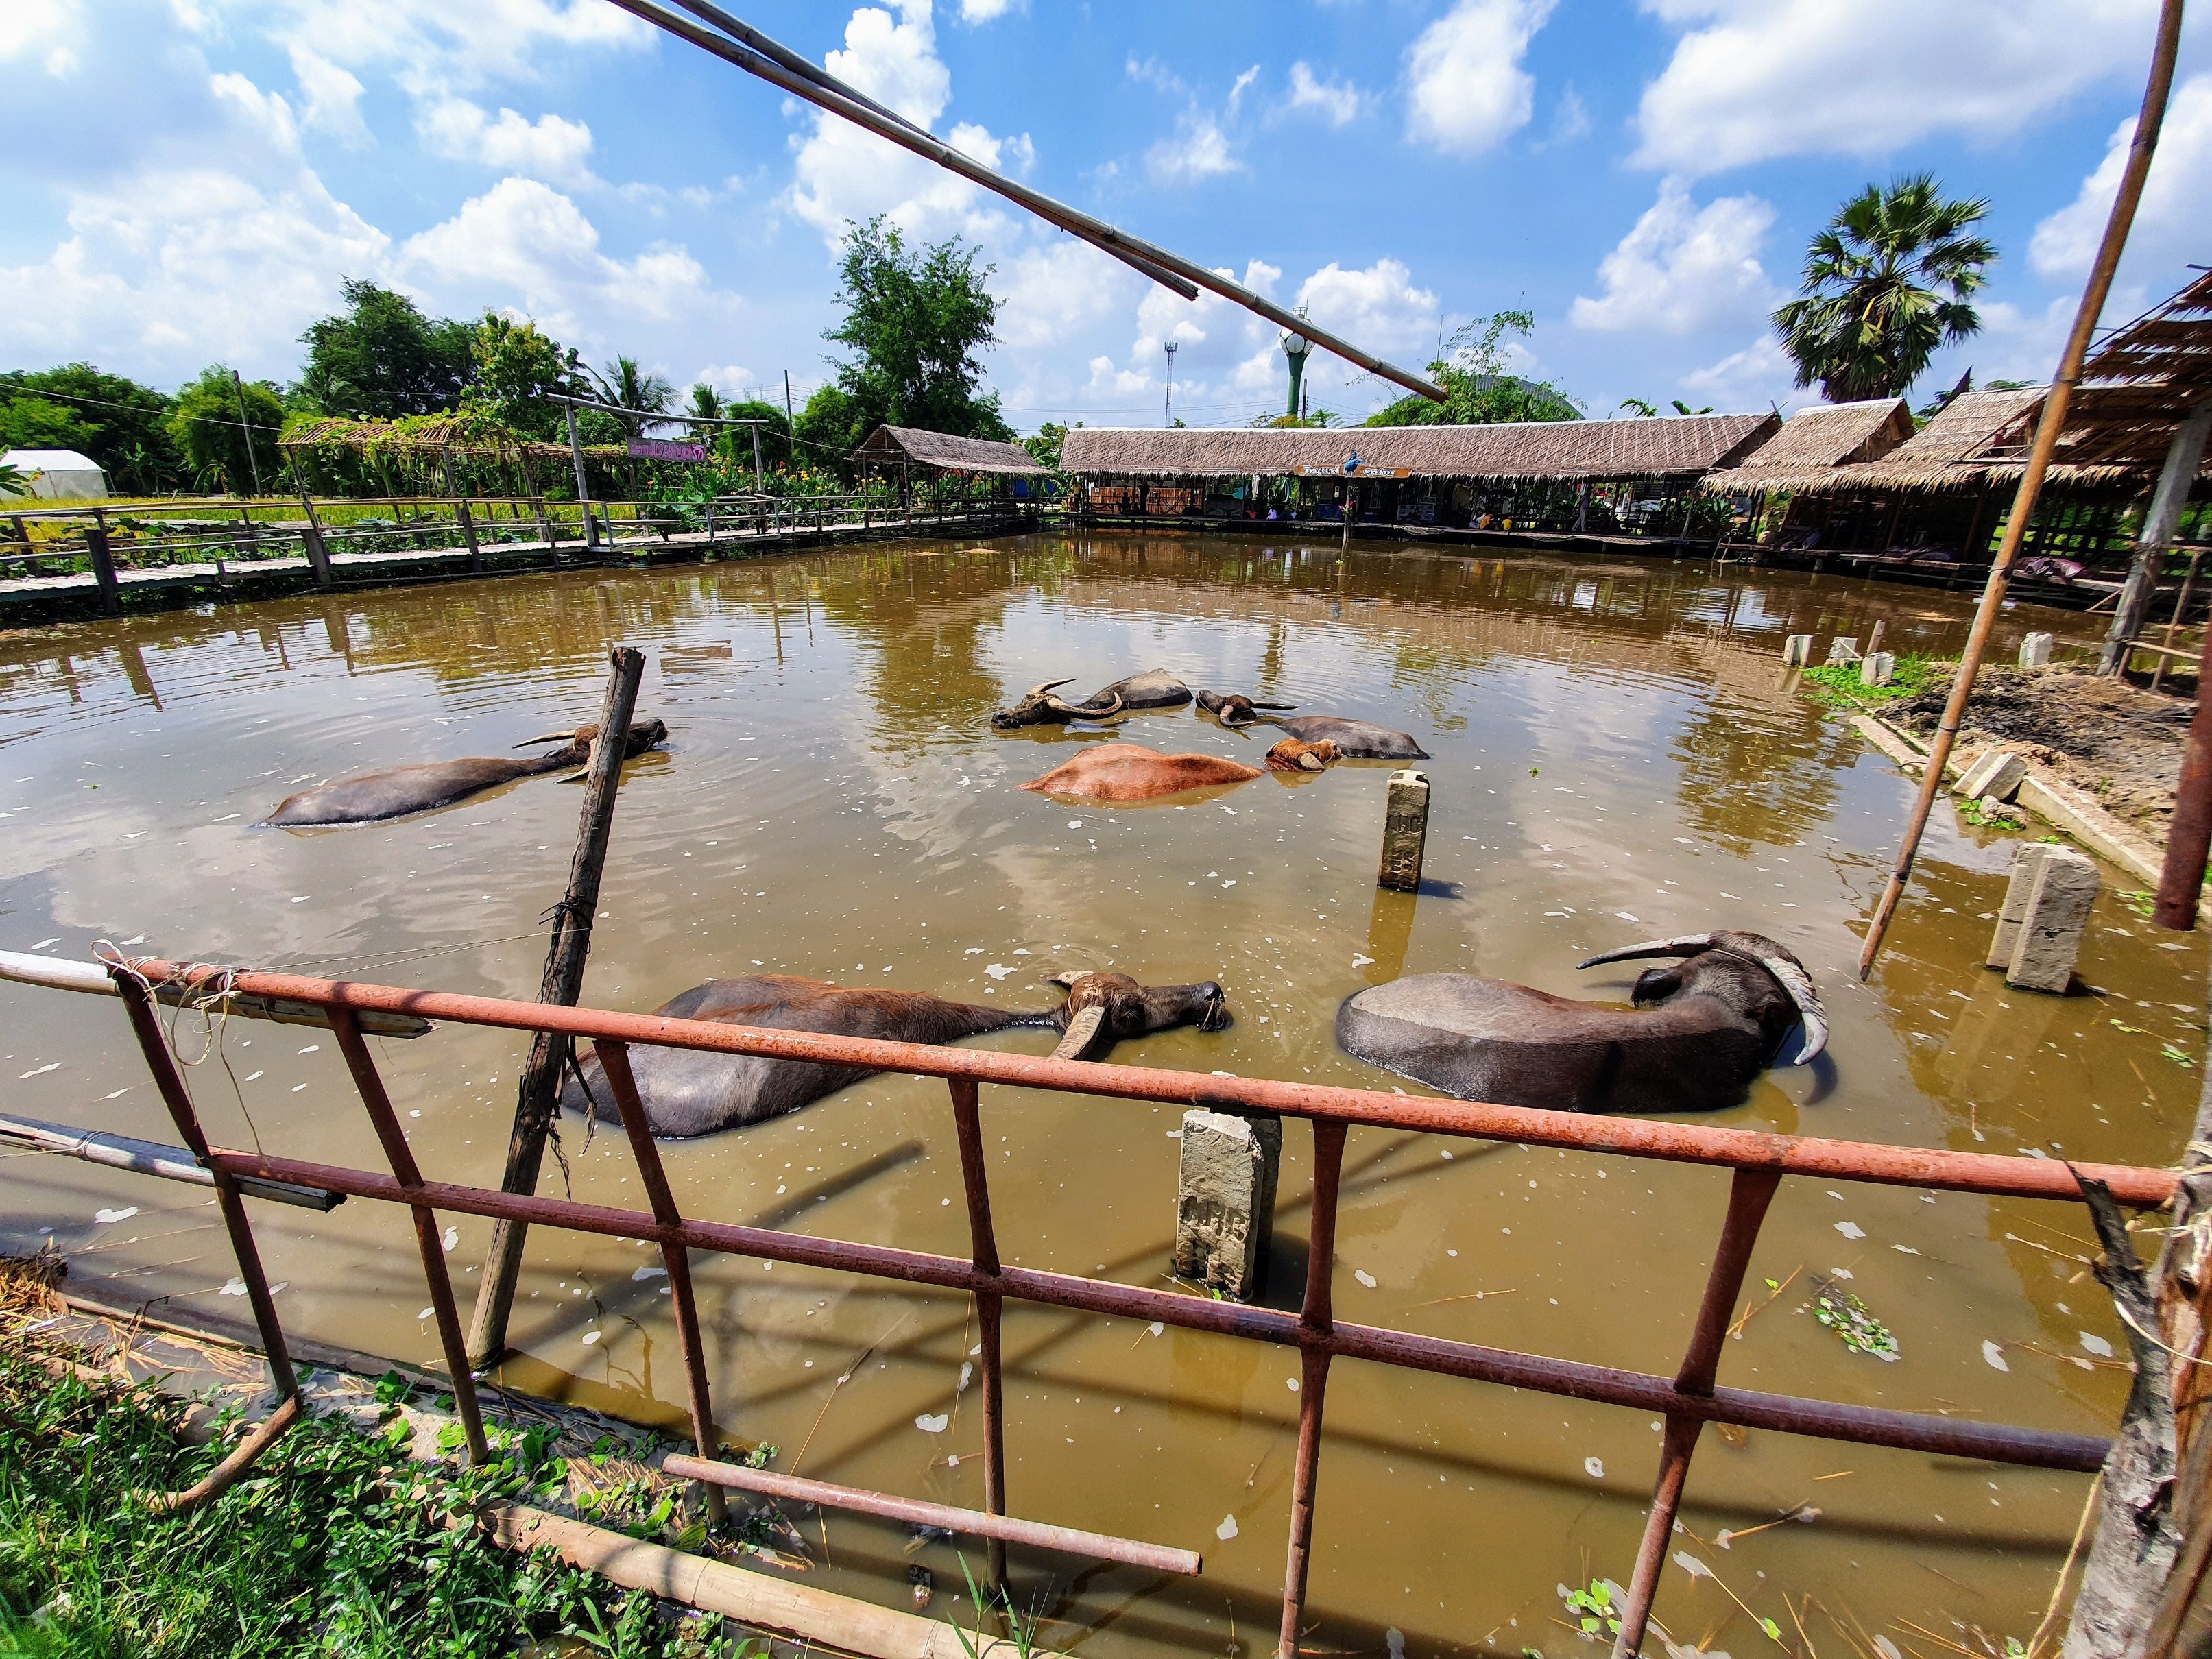 Buffaloes are relaxing in a pond, Buffalo Village